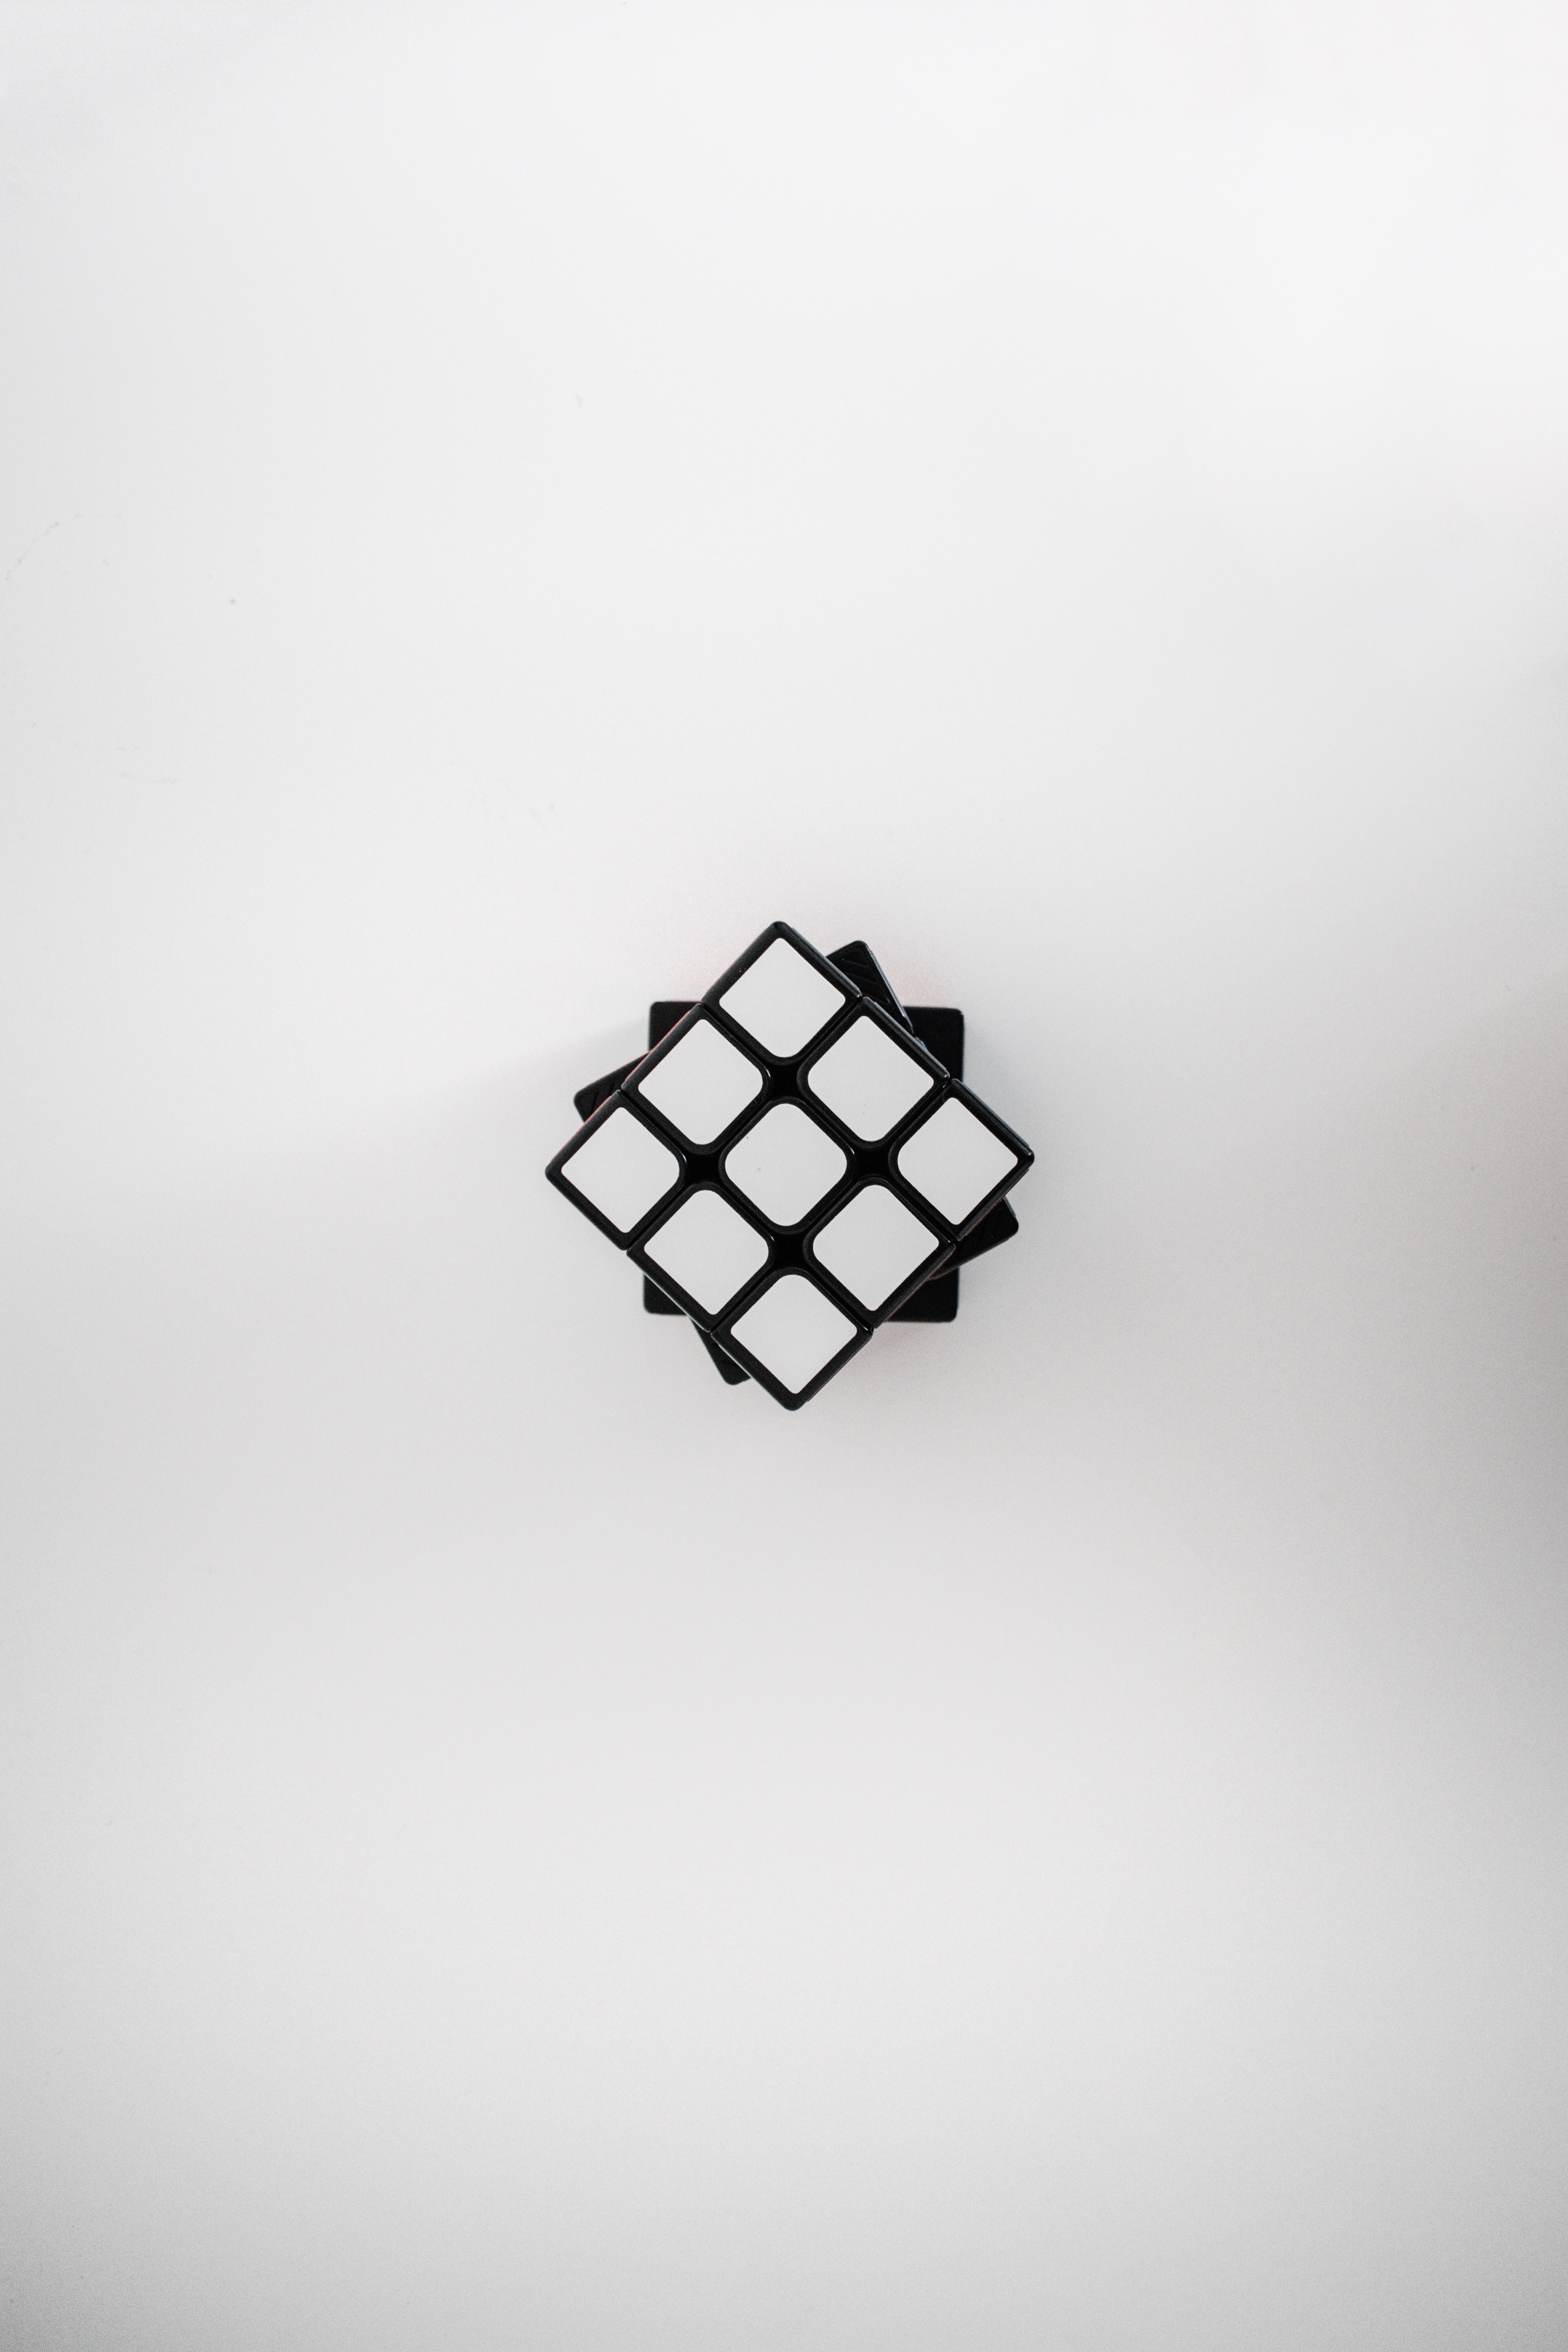 rubik's cube, cube, miscellanea, white, view from above, miscellaneous Free Stock Photo